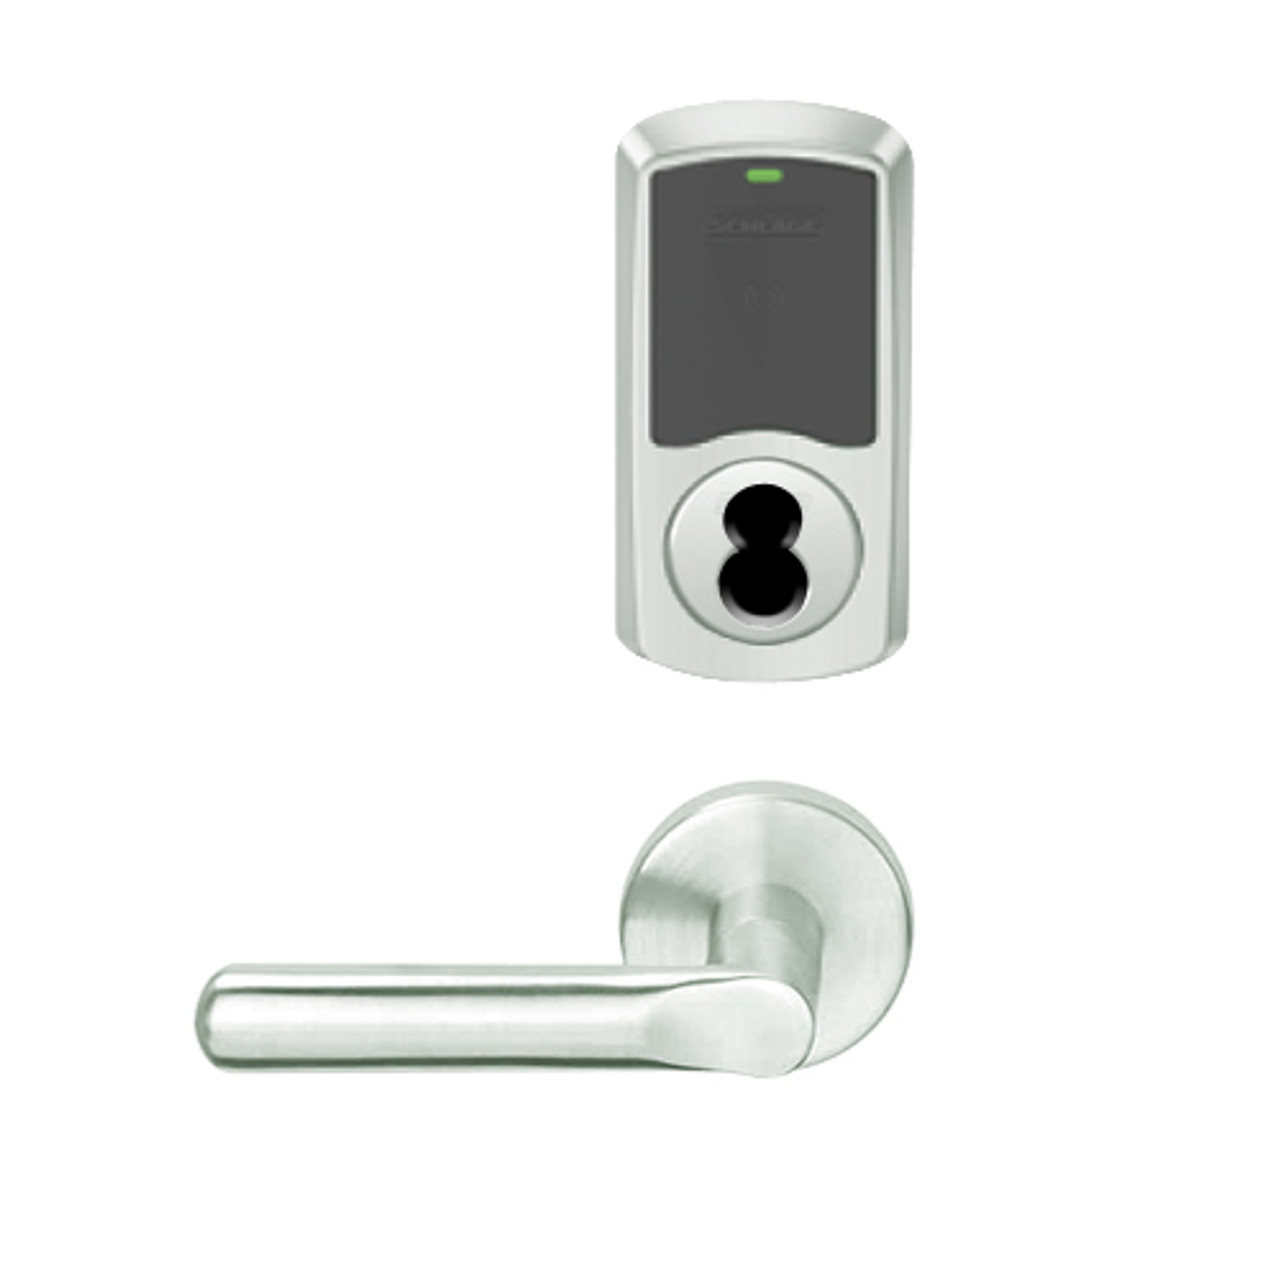 LEMD-GRW-J-18-619-00C Schlage Privacy/Apartment Wireless Greenwich Mortise Deadbolt Lock with LED and 18 Lever Prepped for FSIC in Satin Nickel